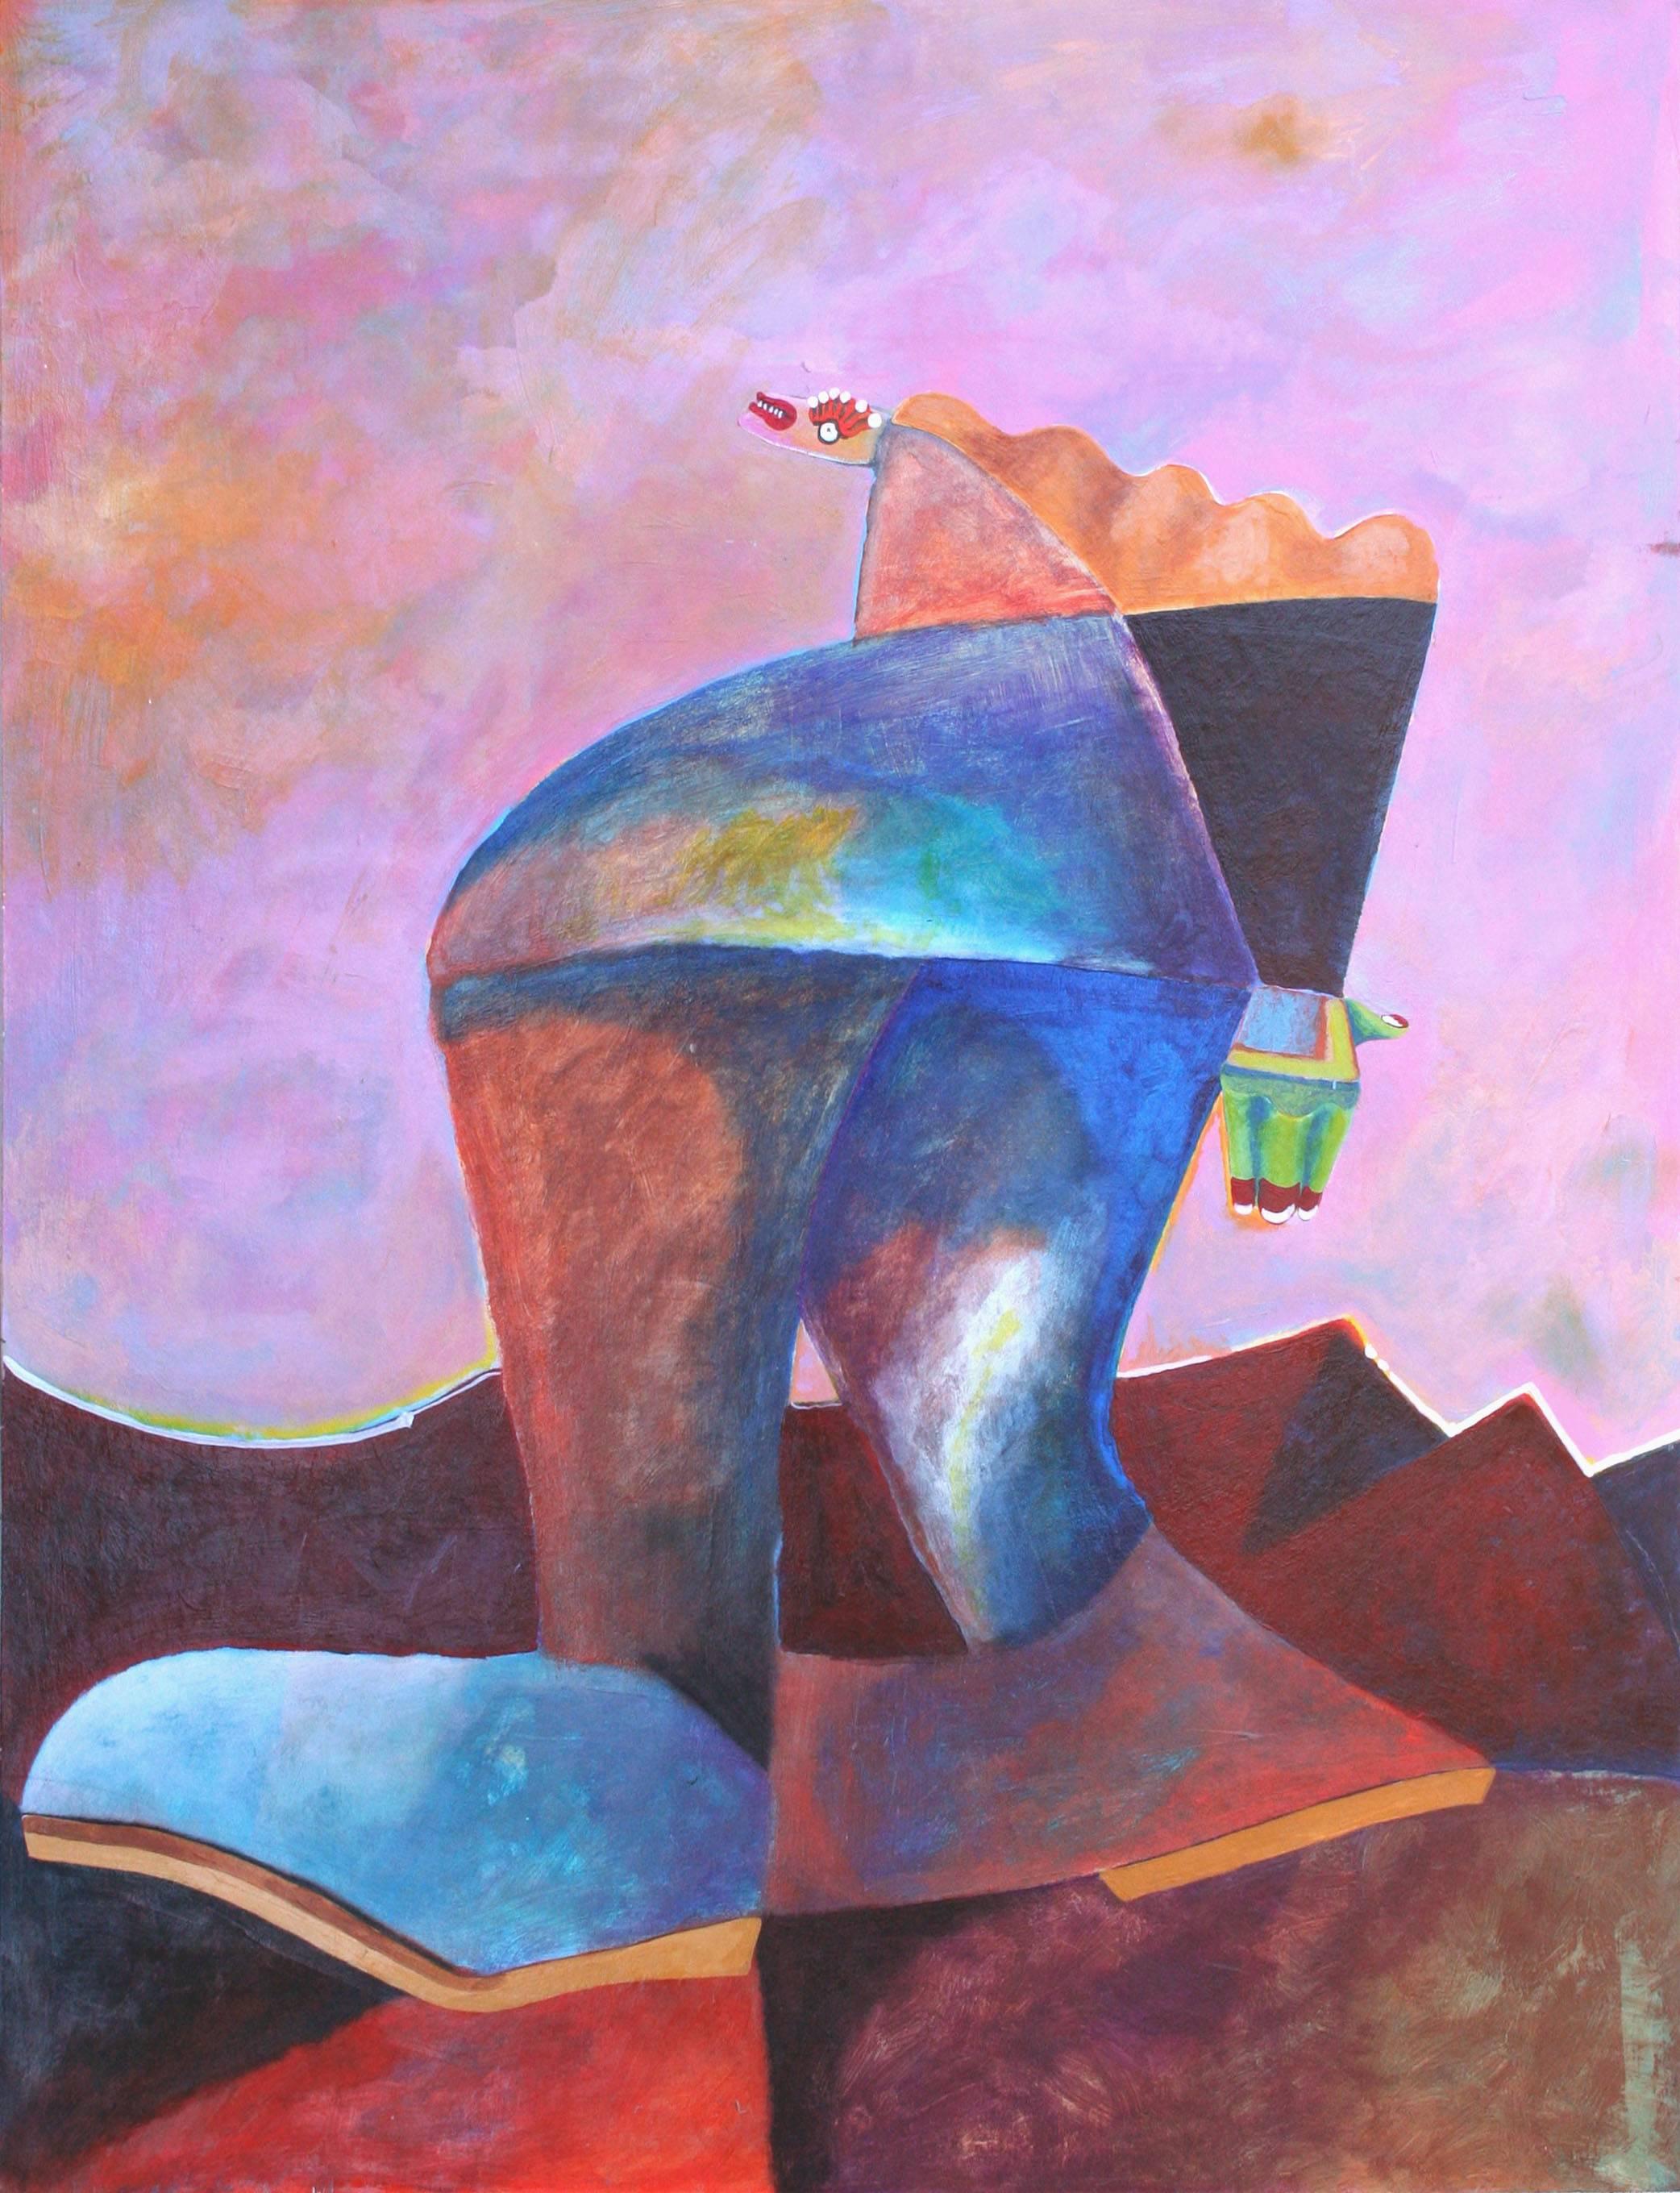 Walking Creature, Contemporary Surreal Figurative Abstract 